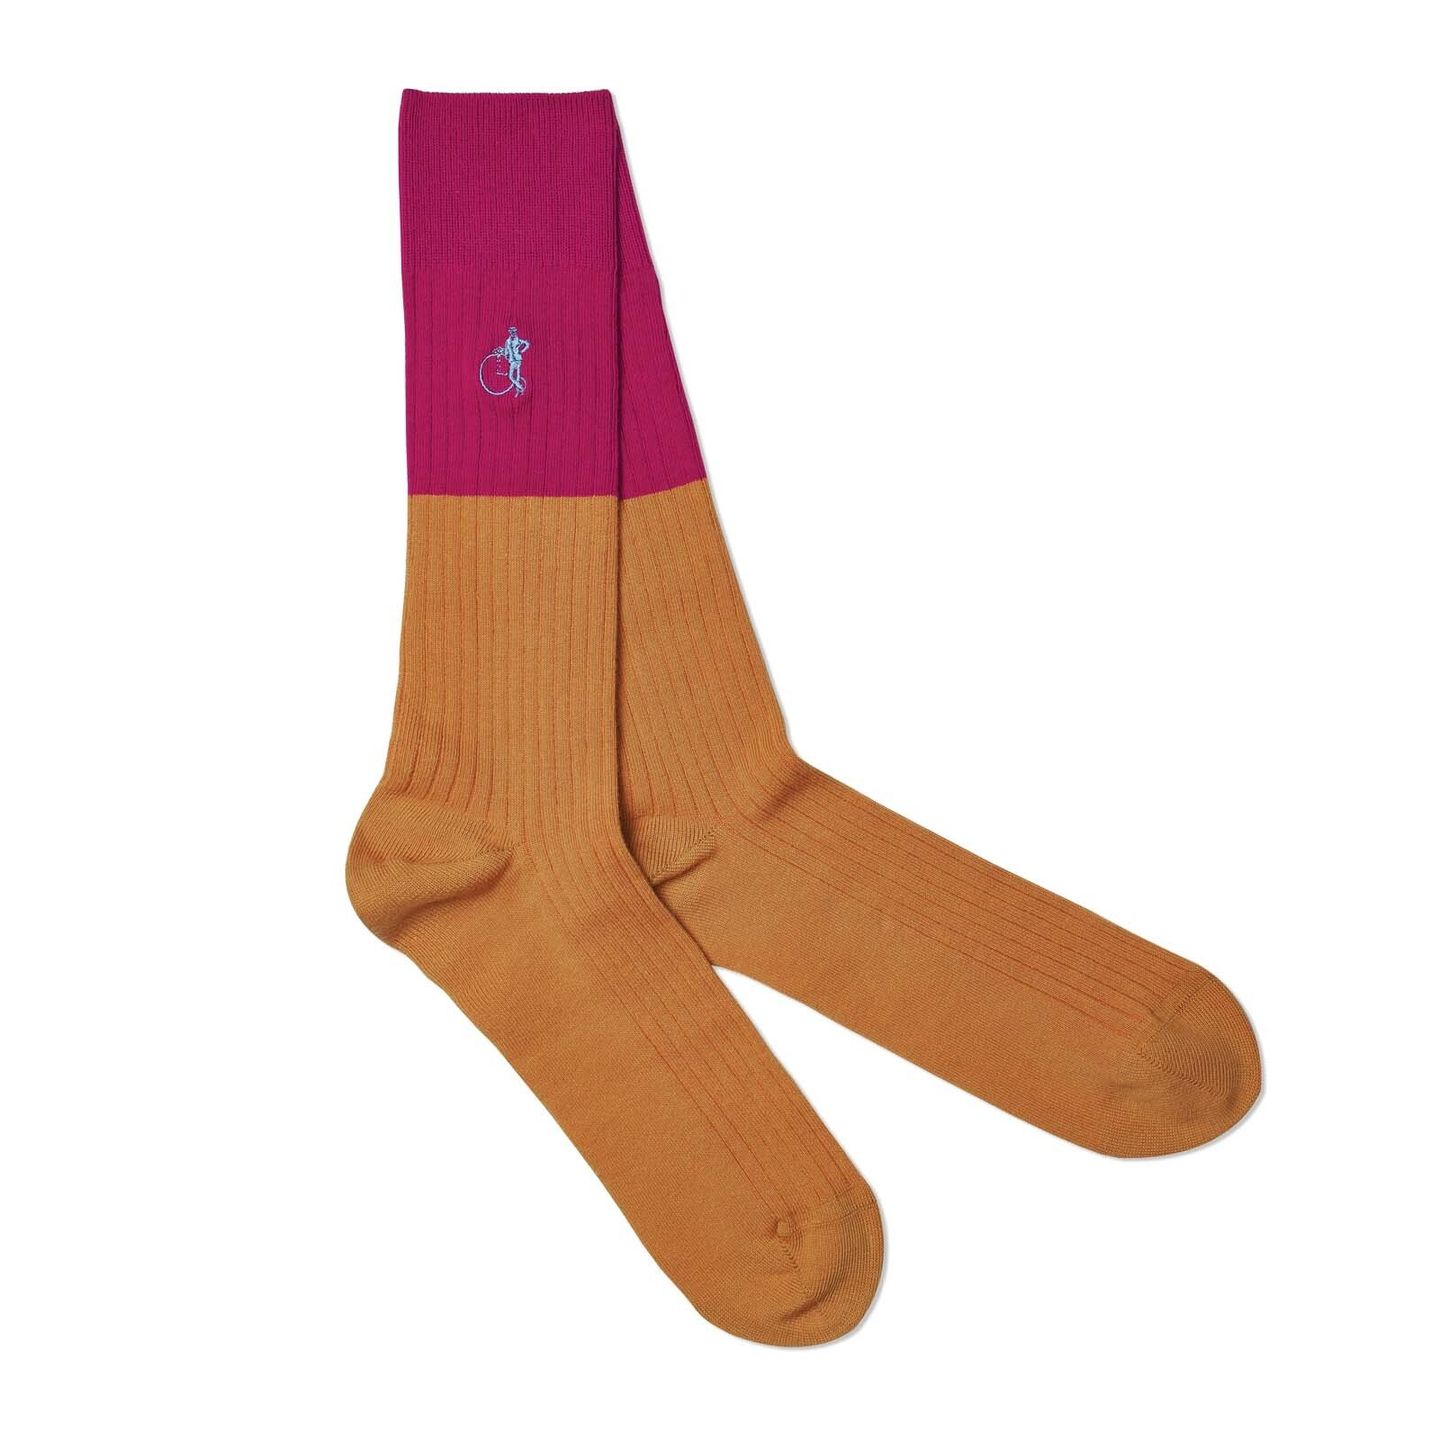 Dual coloured socks with a pink top and camel bottom